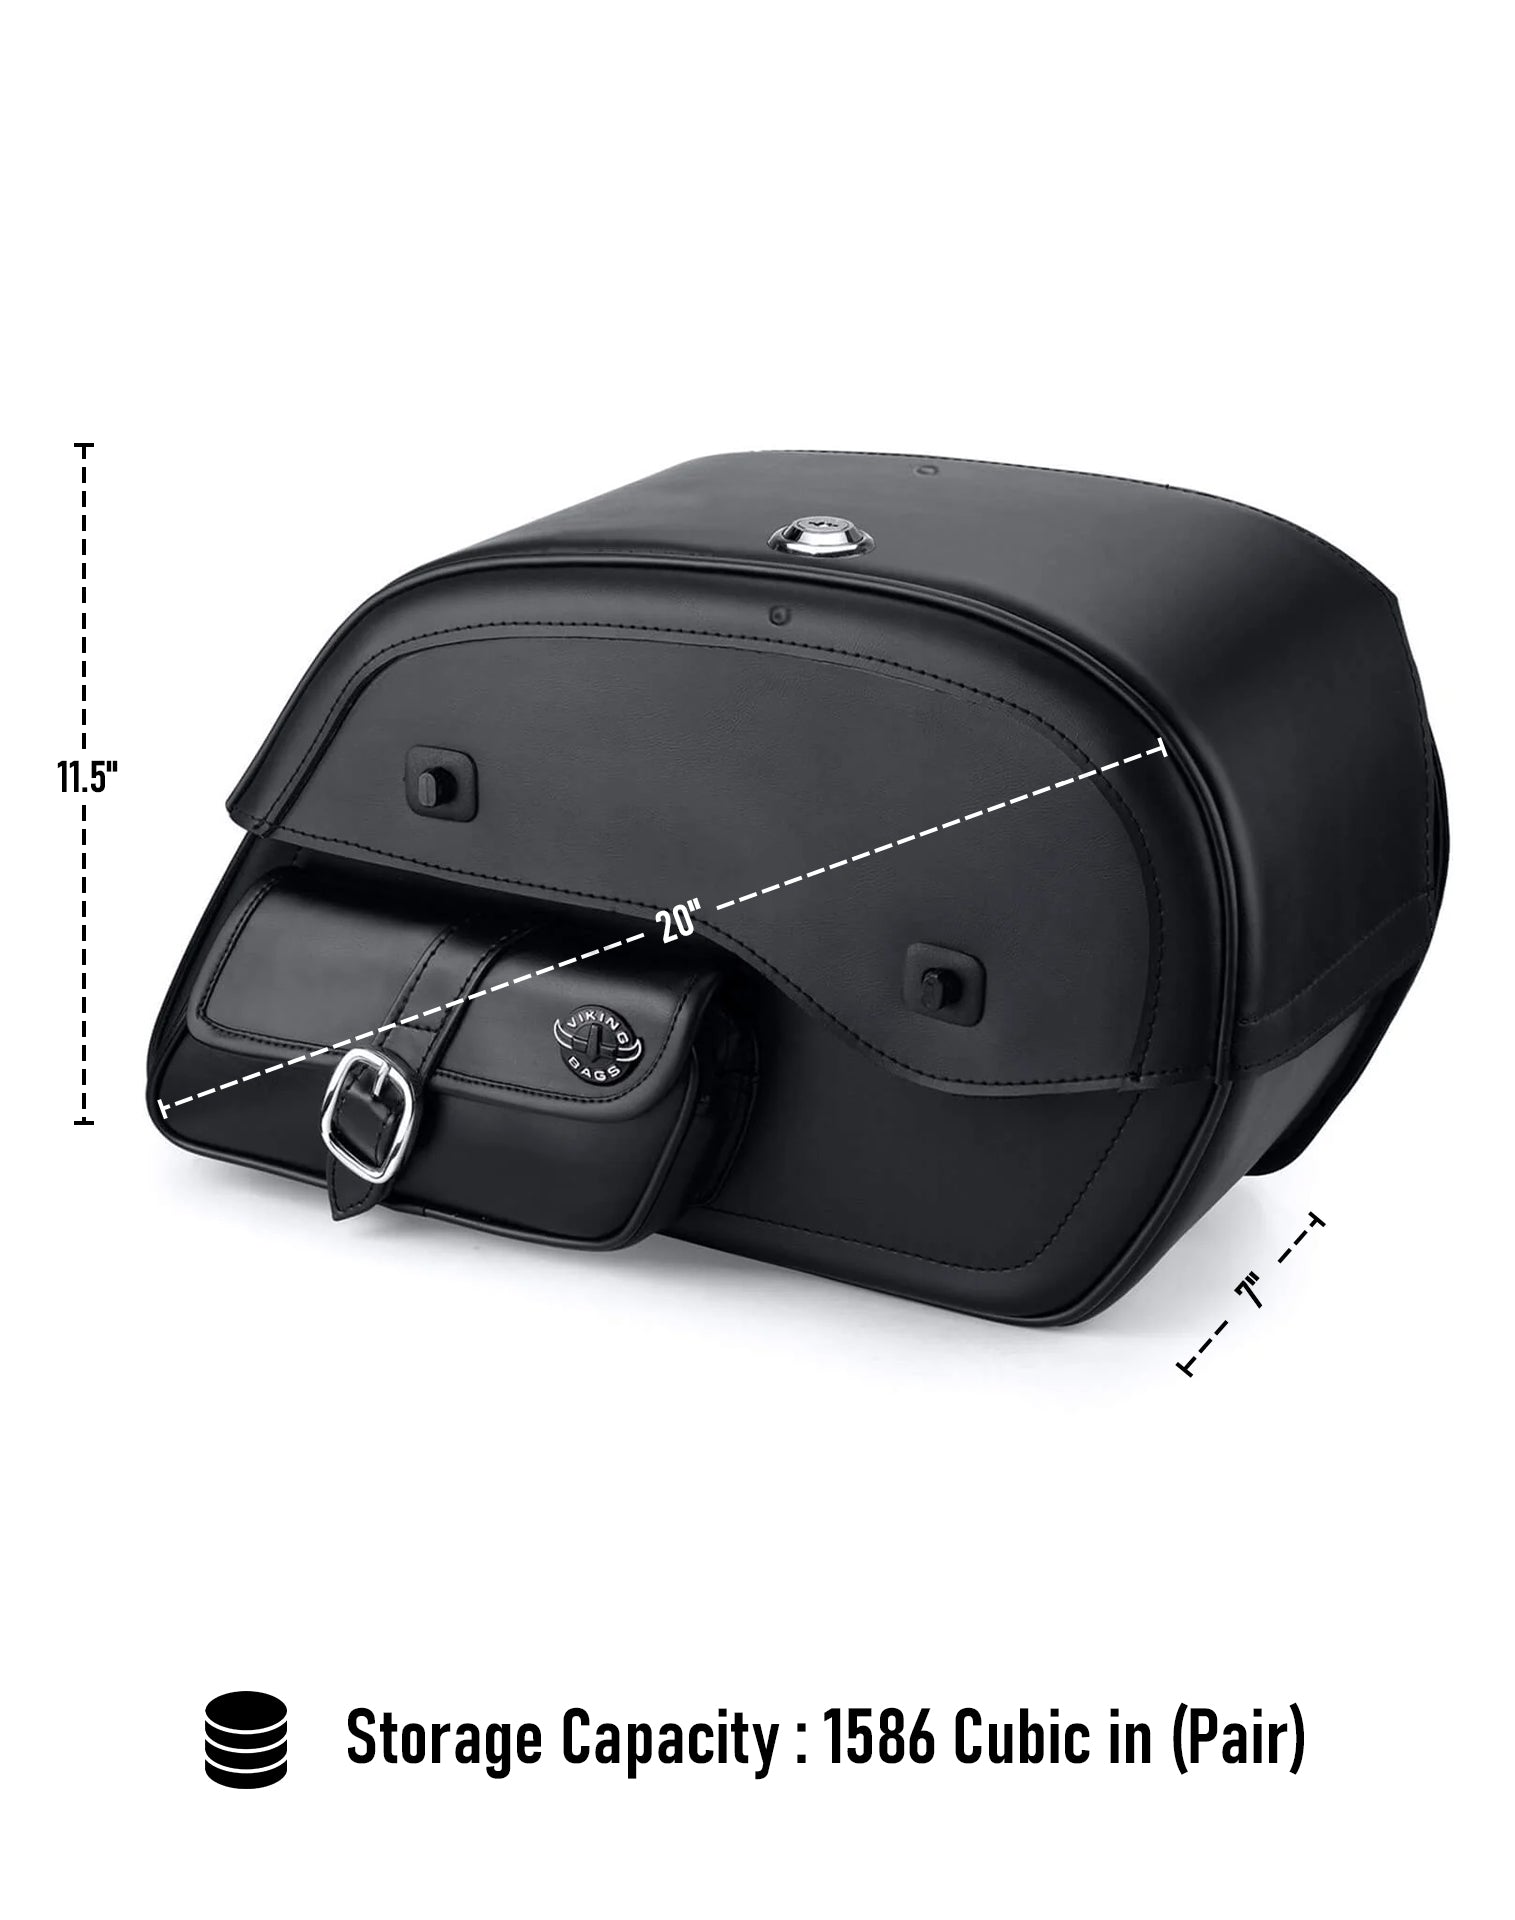 Viking Essential Side Pocket Large Shock Cutout Leather Motorcycle Saddlebags For Harley Dyna Fat Bob Fxdf Se Can Store Your Ridings Gears